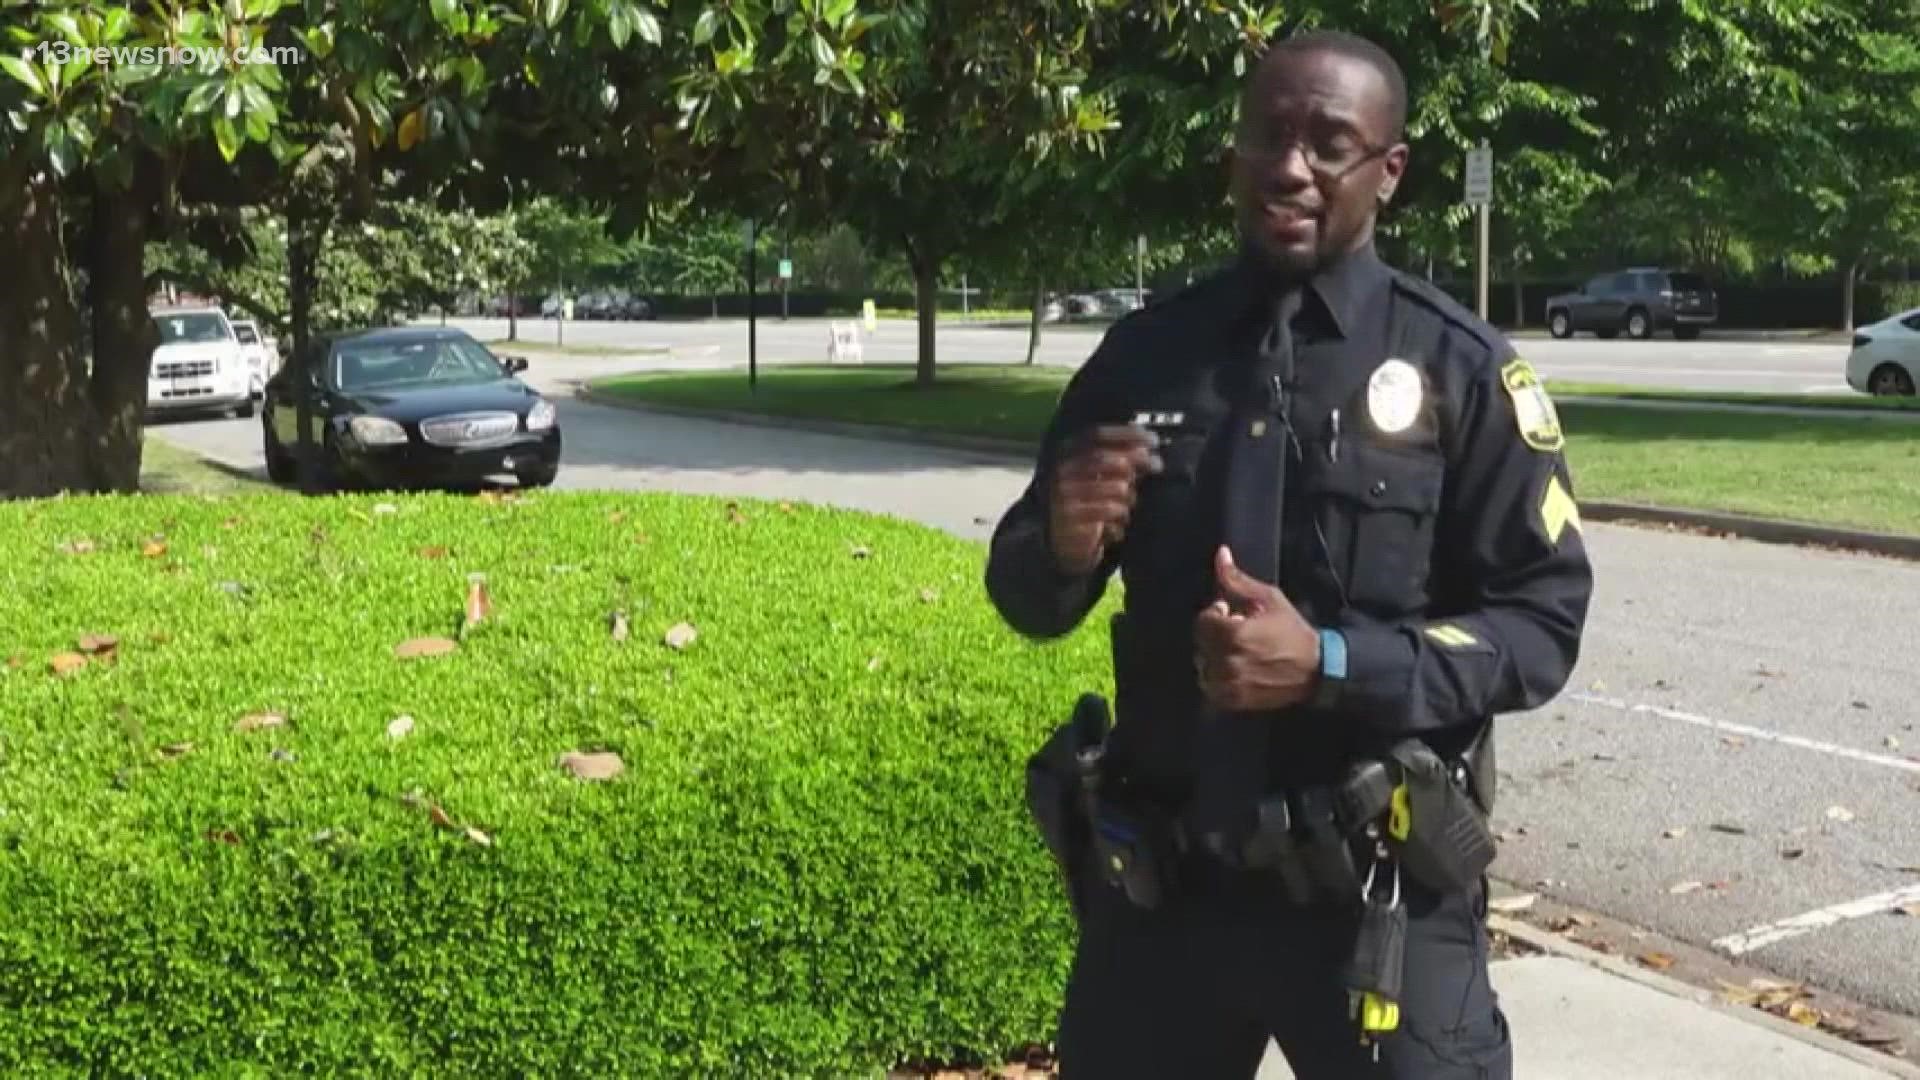 Sgt. Washington said in his new job, he wants to help people in the Black community reach a place of understanding, even if they don't agree with him.